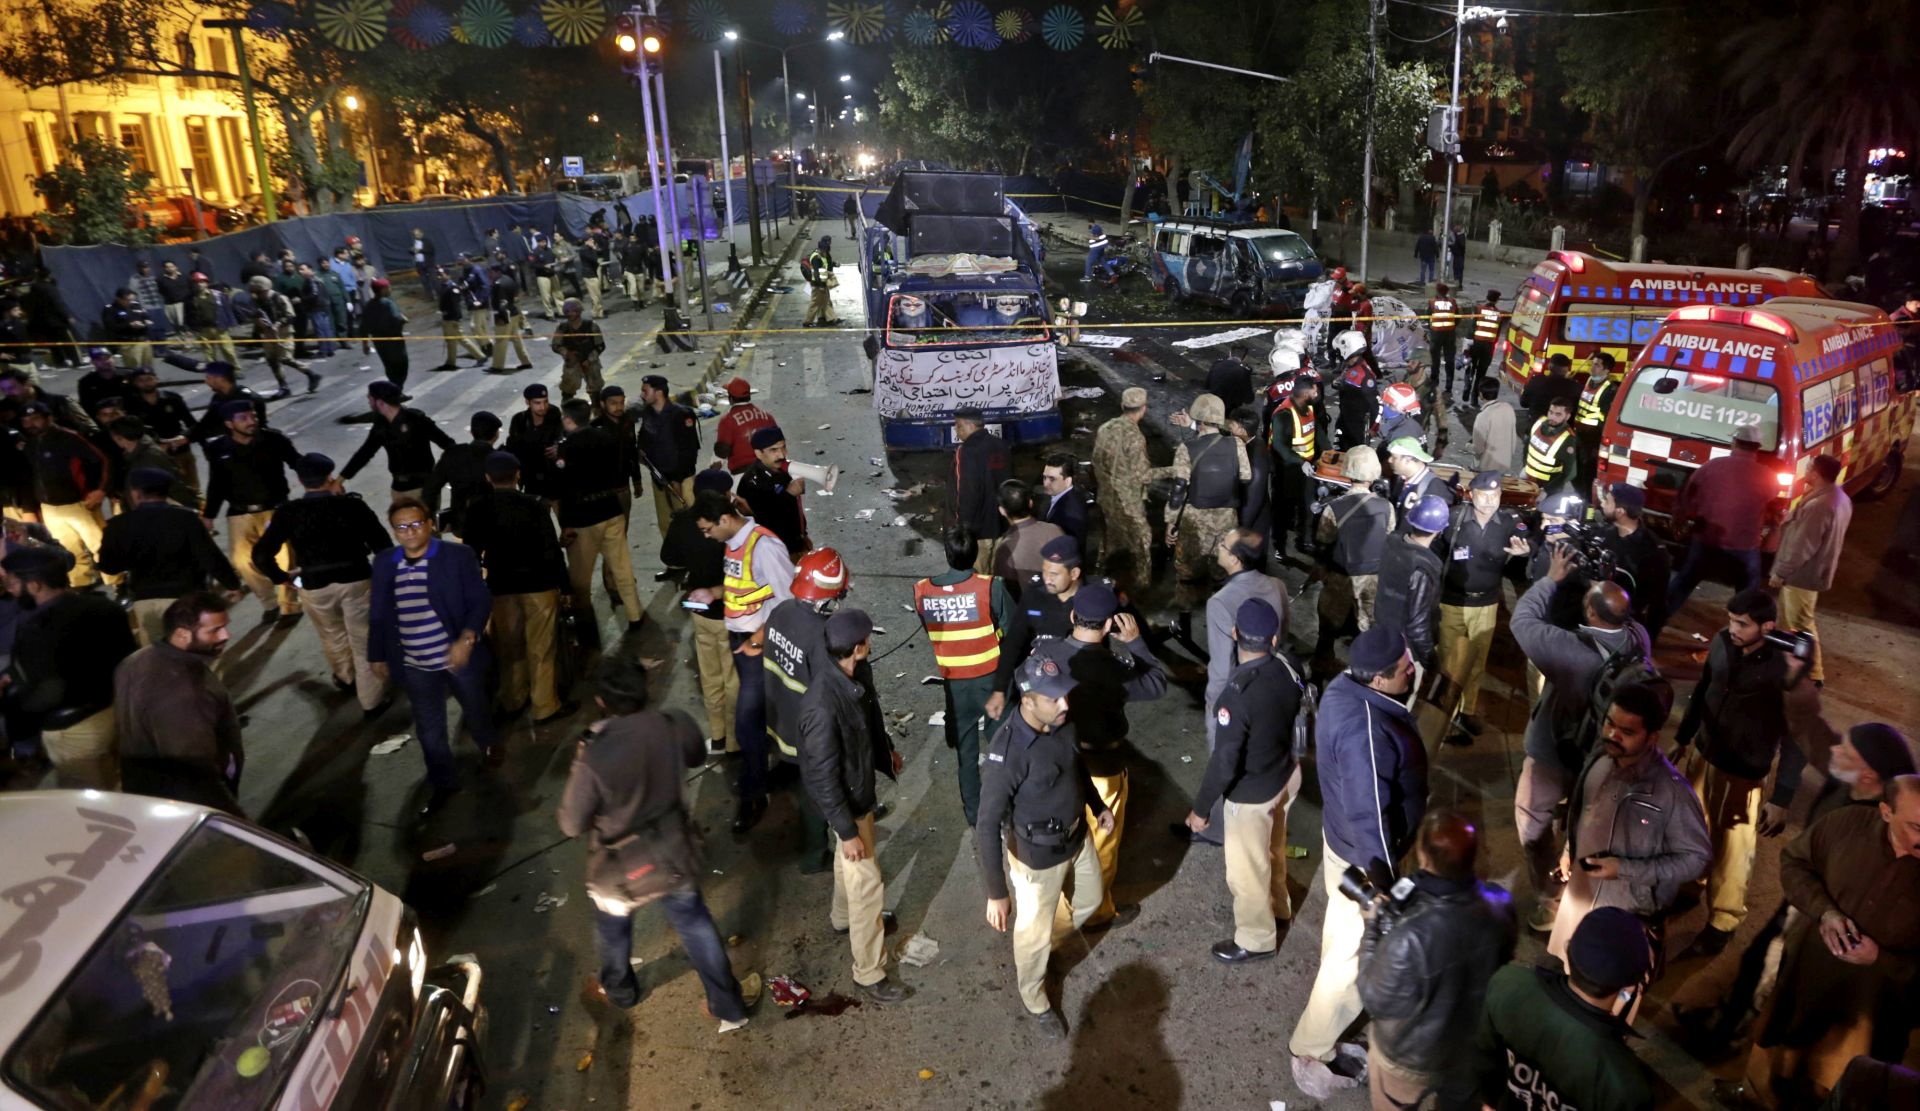 epa05791107 Security officials inspect the scene of a suicide bomb attack that targeted a protest by Pharmacists outside the Punjab provincial assembly in Lahore, Pakistan, 13 February 2017. At least 10 people were killed and several other injured in the incident.  EPA/RAHAT DAR ATTENTION EDITORS: PICTURE CONTAINS GRAPHIC CONTENT